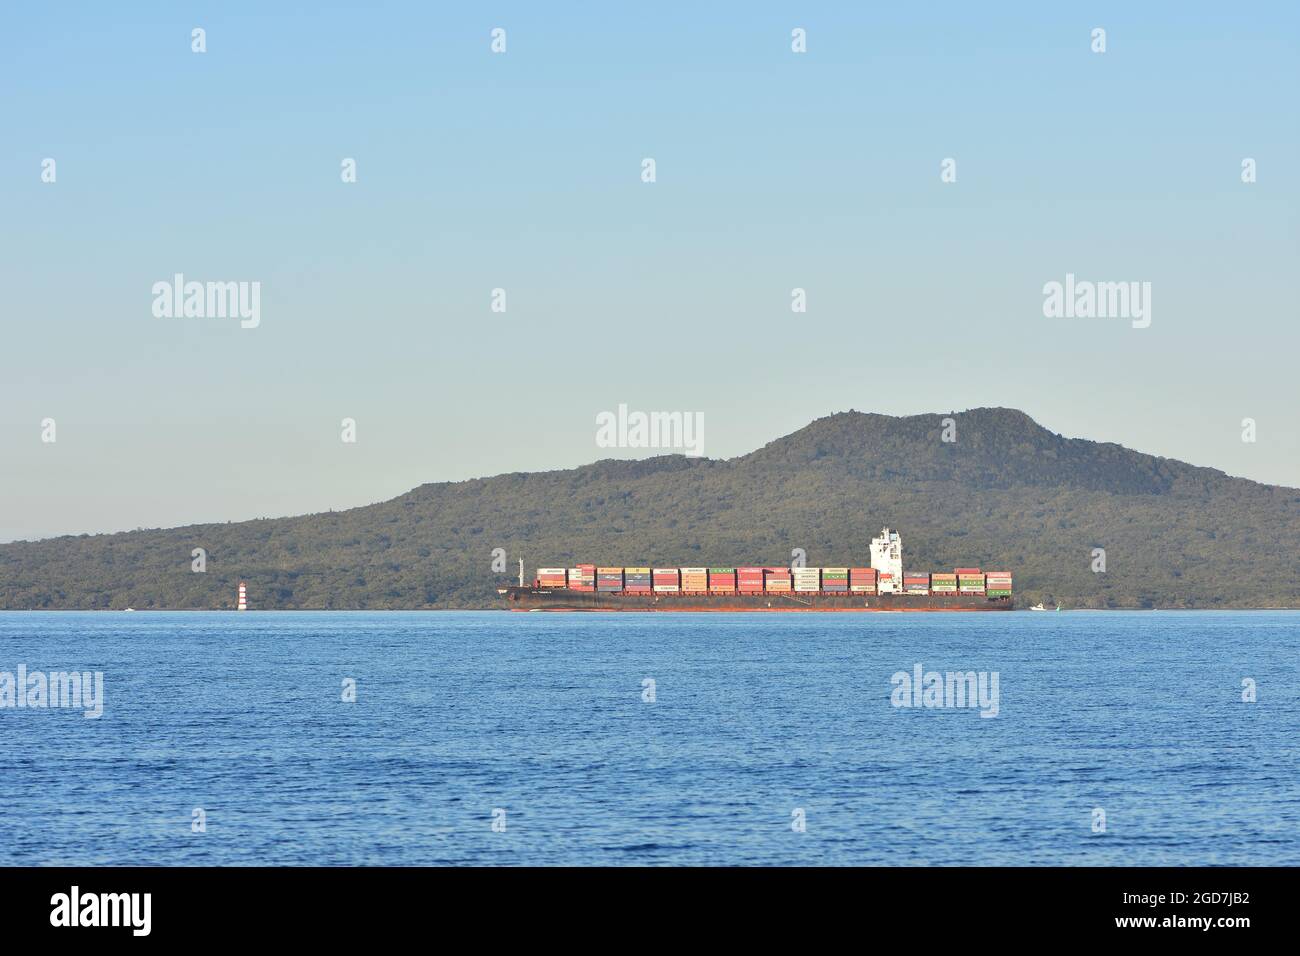 Container ship with rusty hull loaded with colourful shipping containers moving along island coast. Stock Photo